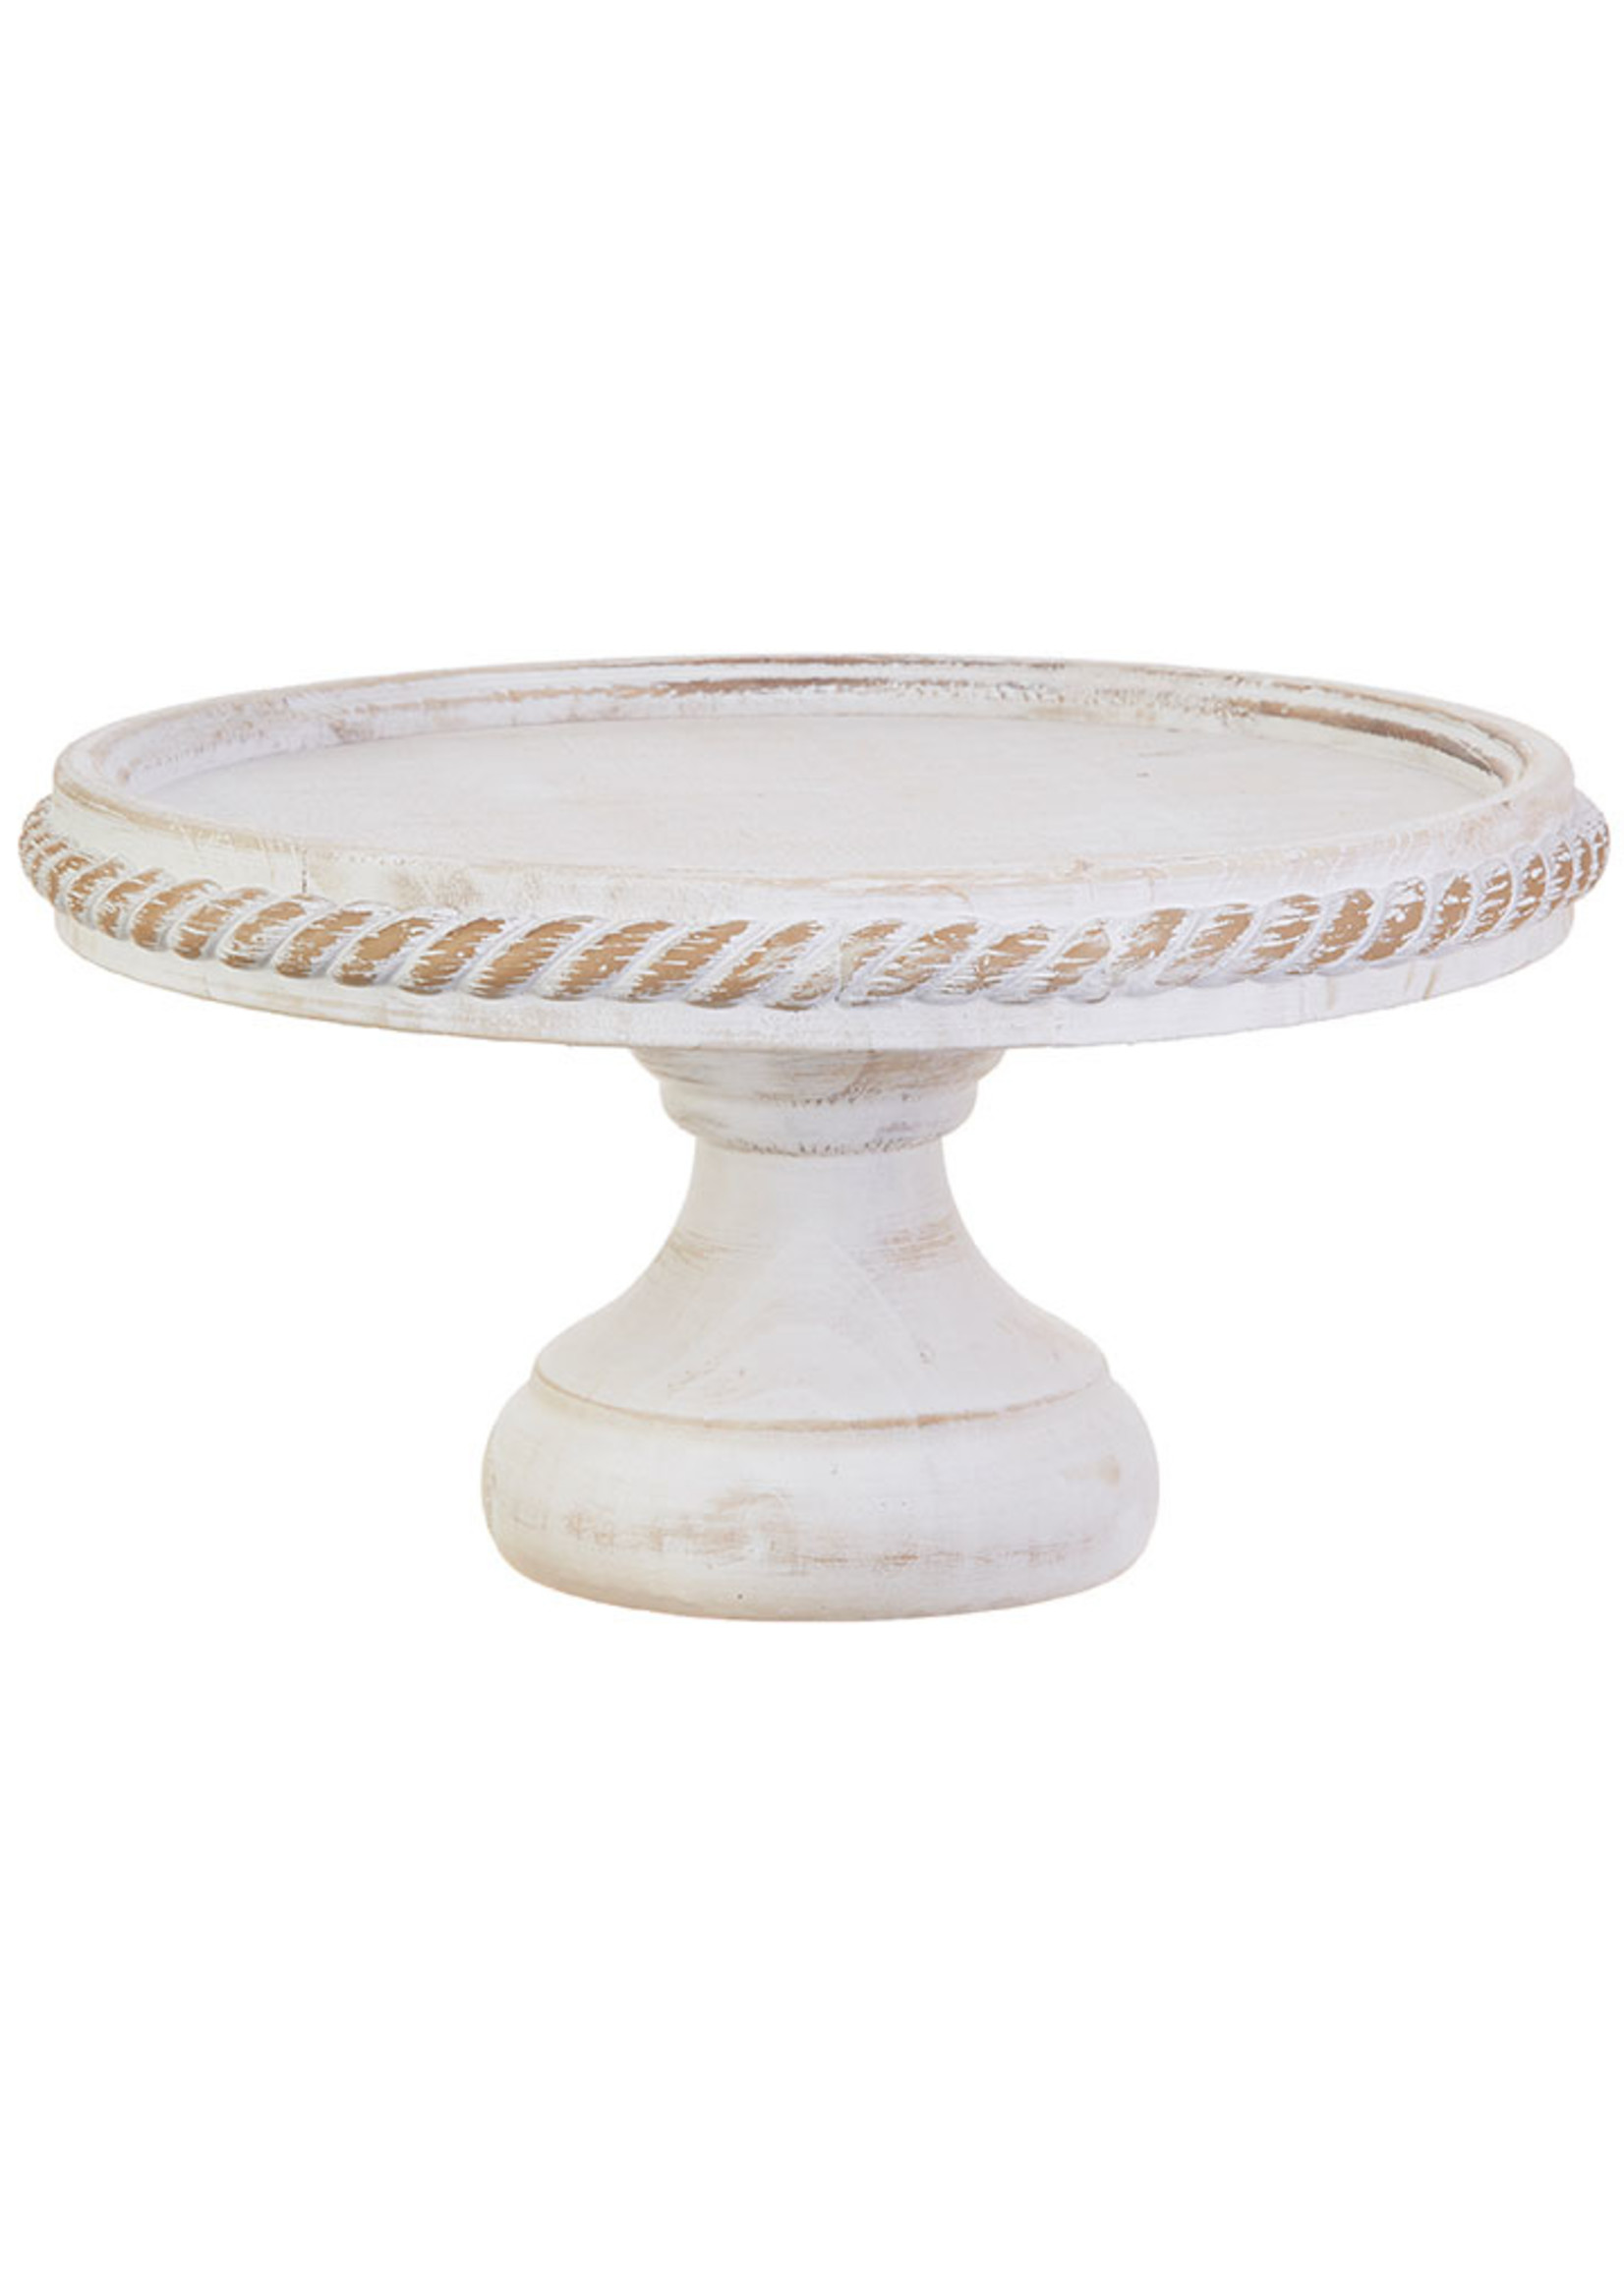 12.5in Wht Distressed Cake Stand